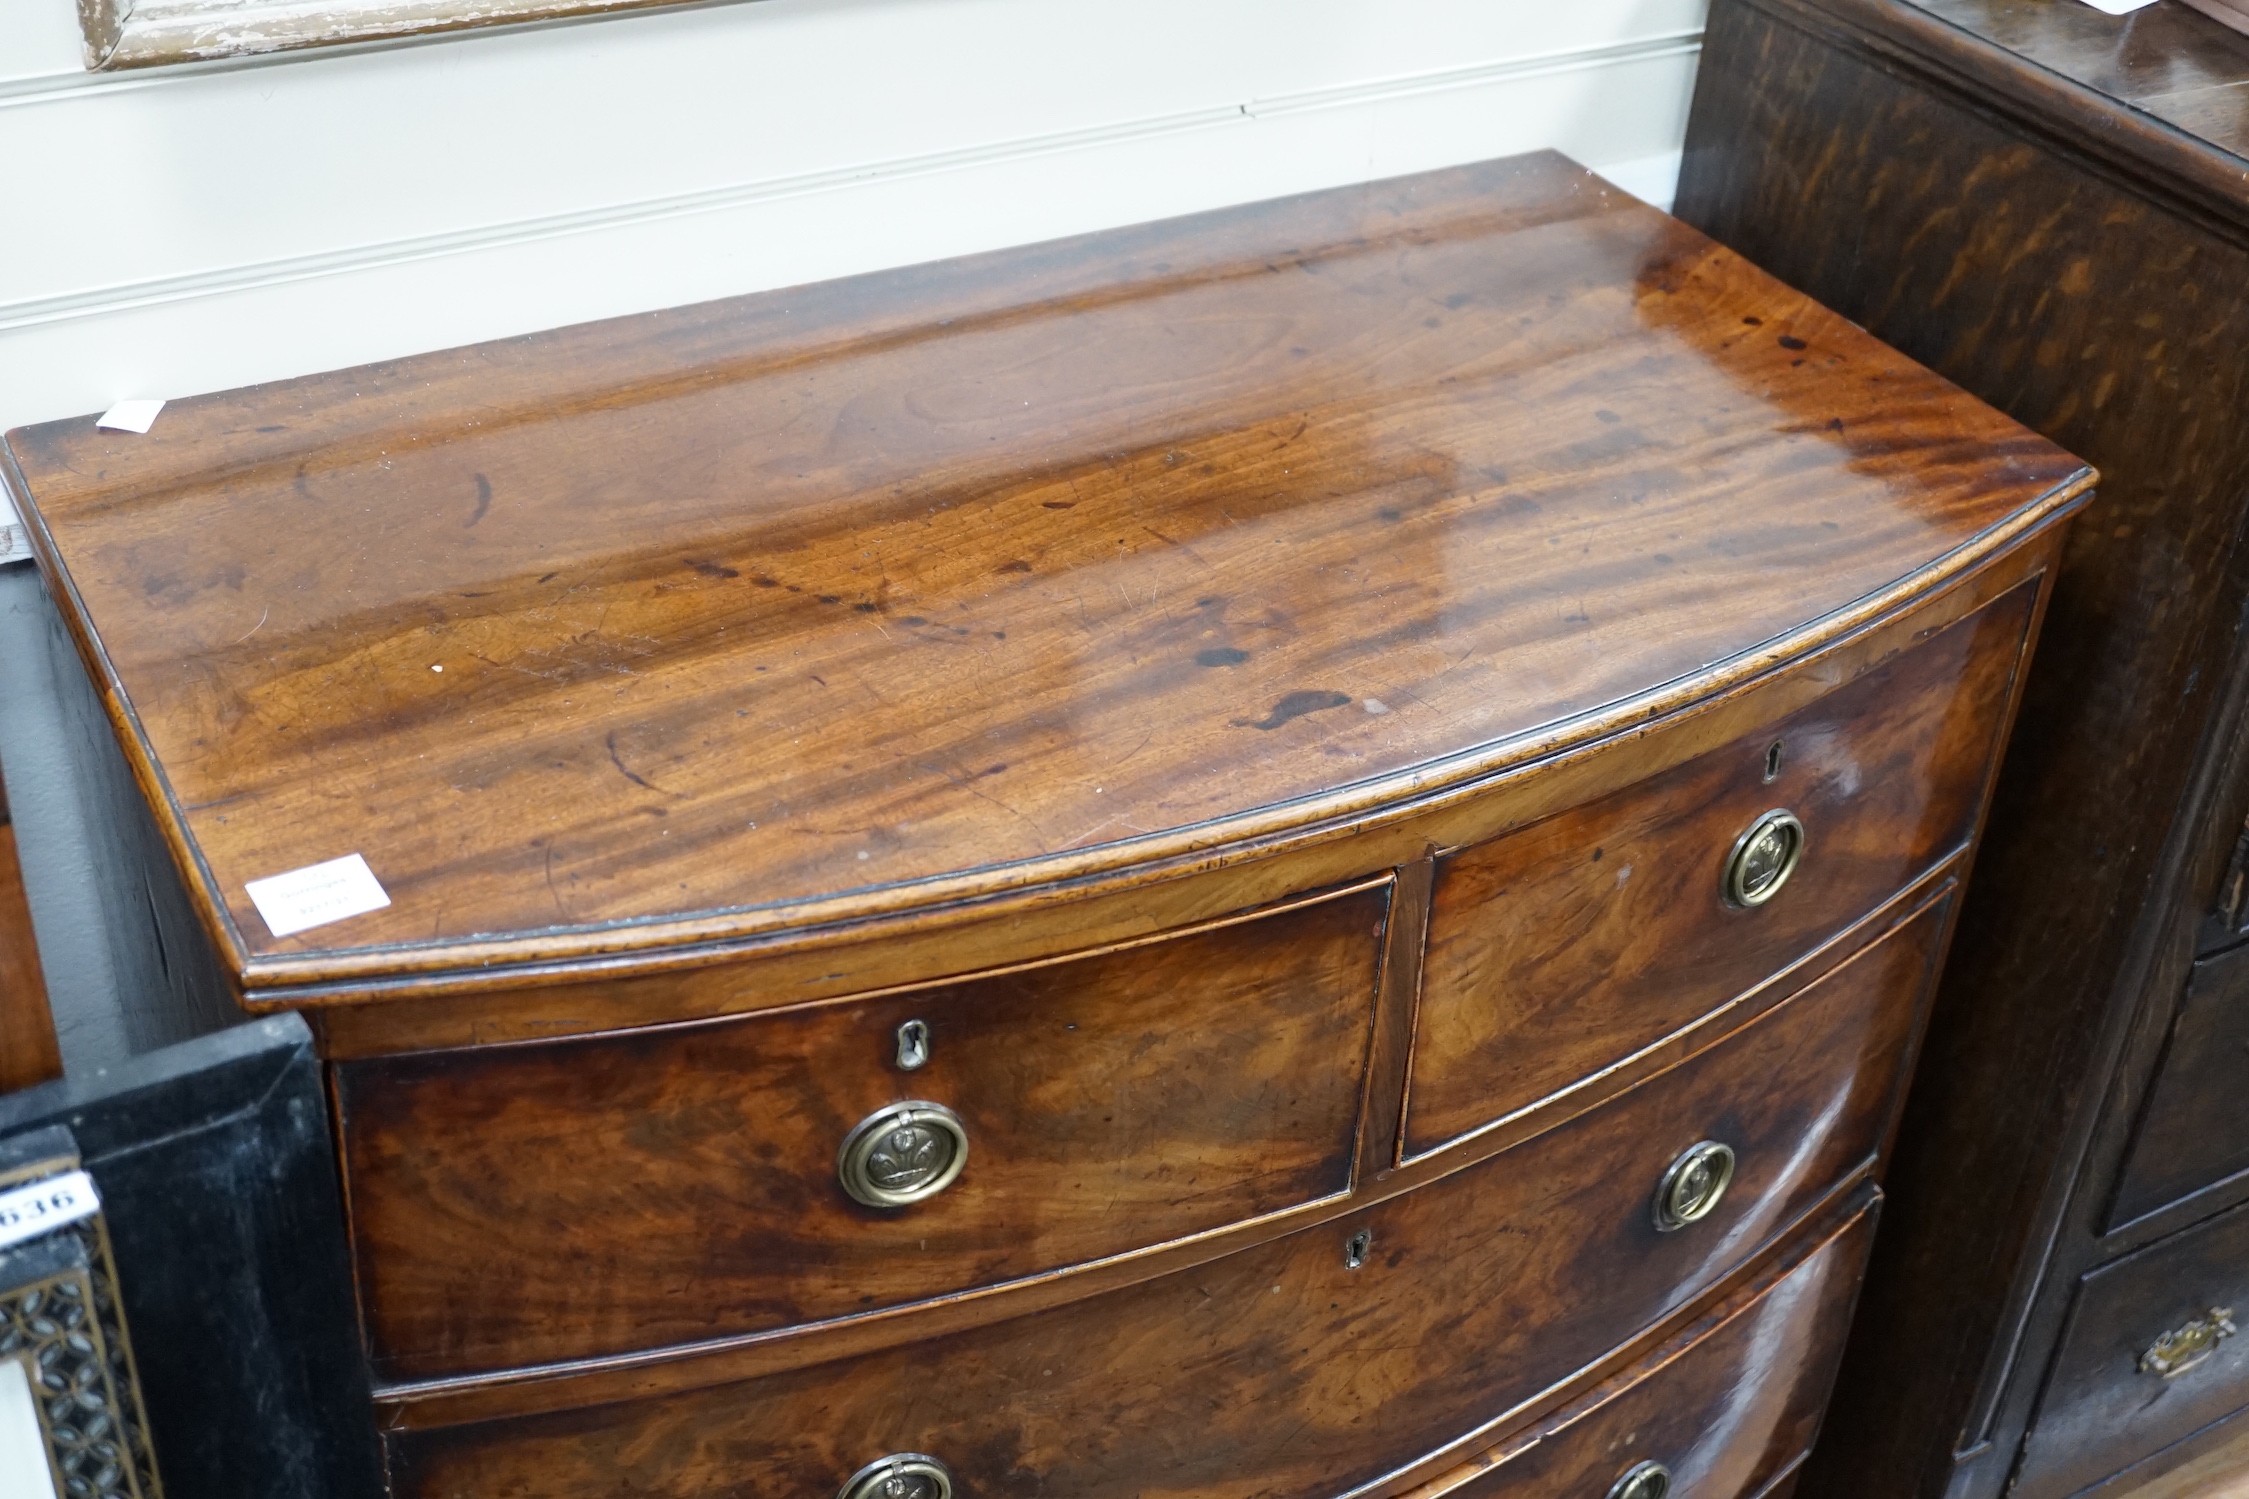 An early 19th century mahogany four drawer bowfront chest, width 88cm *Please note the sale commences at 9am.